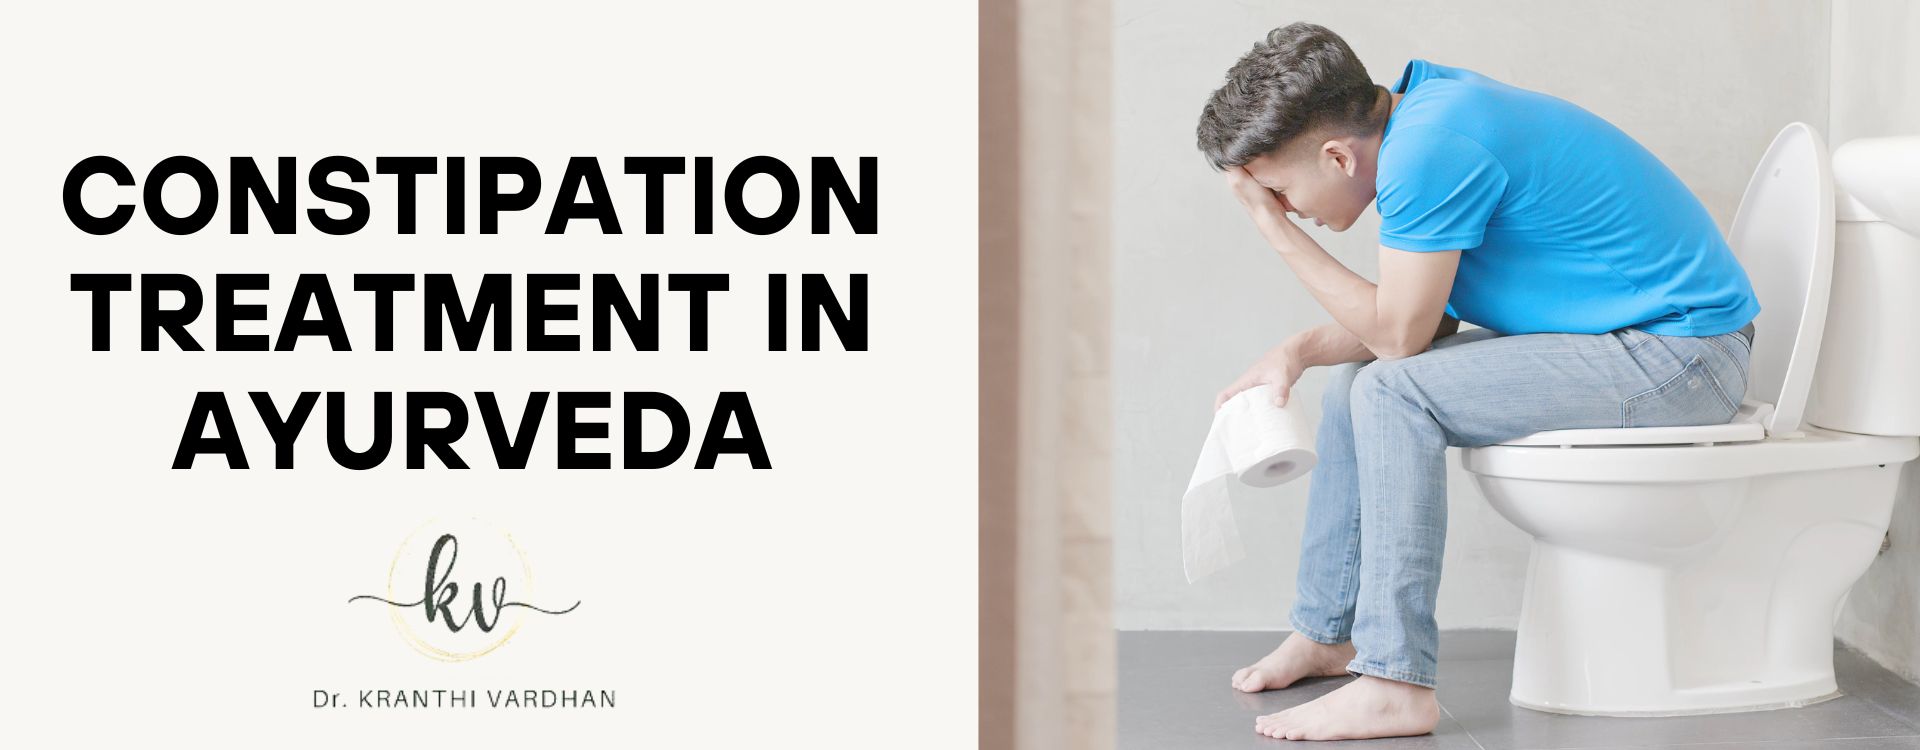 Constipation Treatment in Ayurveda: Natural Remedies and Tips